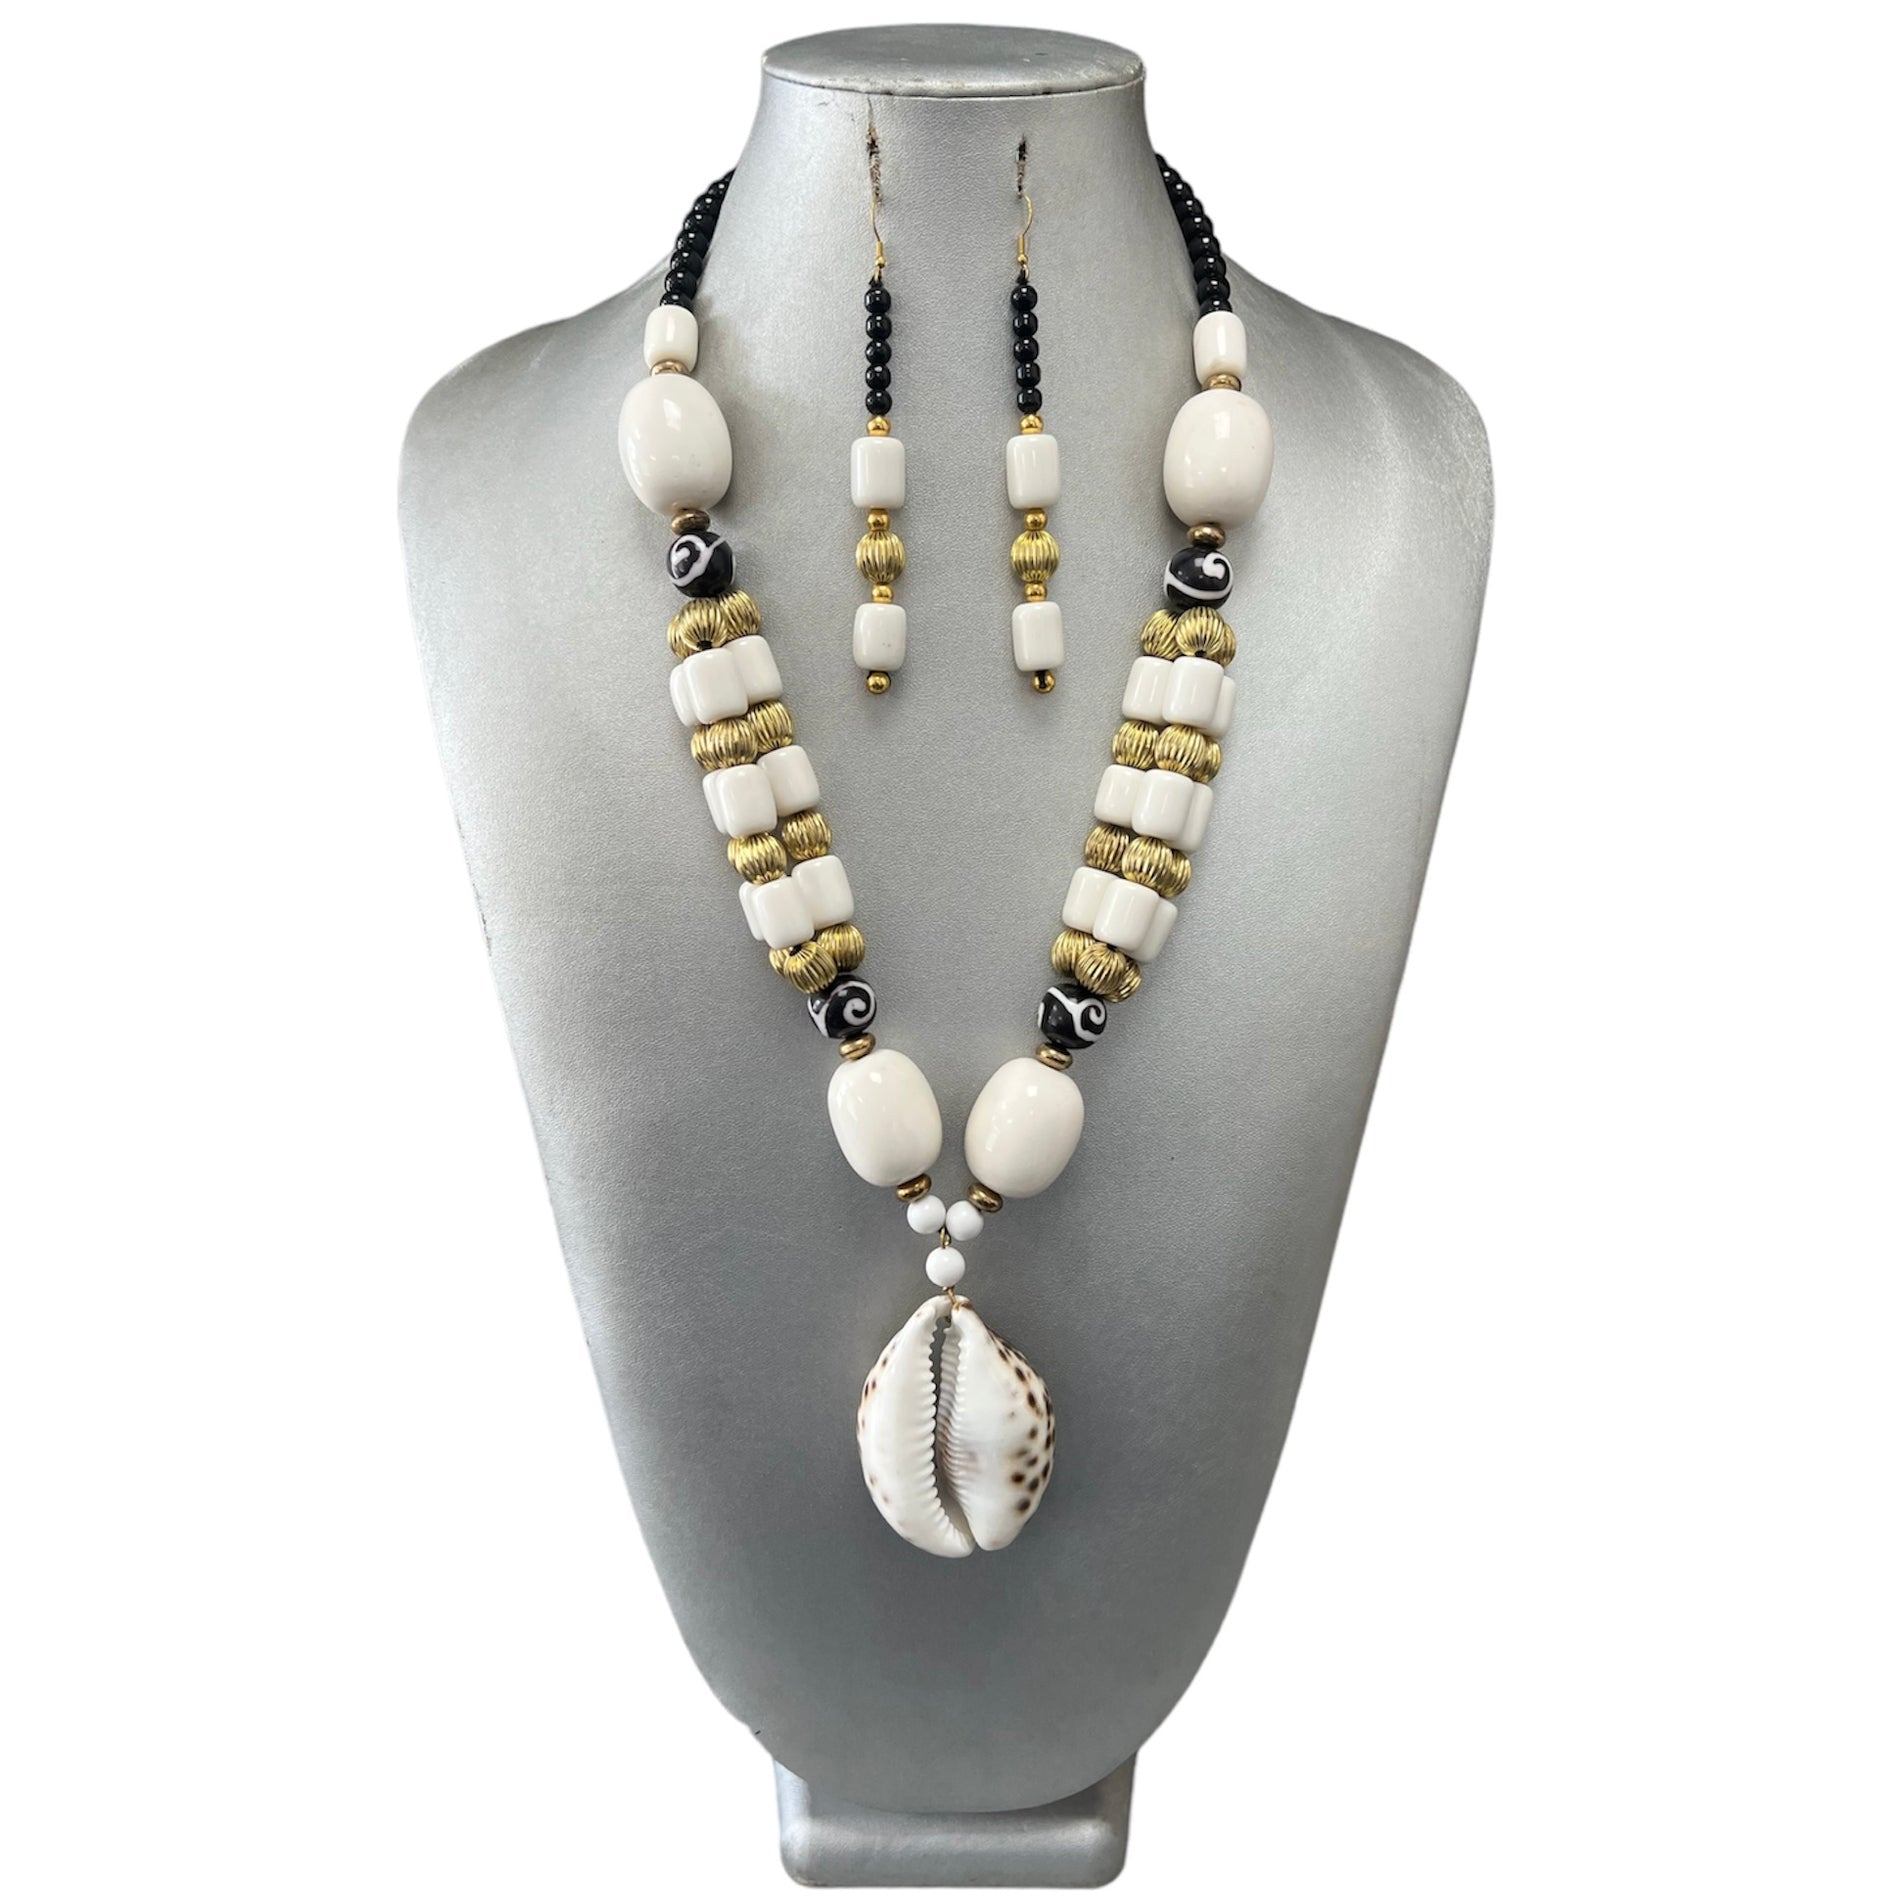 Women's African Necklace Set With Large Cowrie Shell Pendant